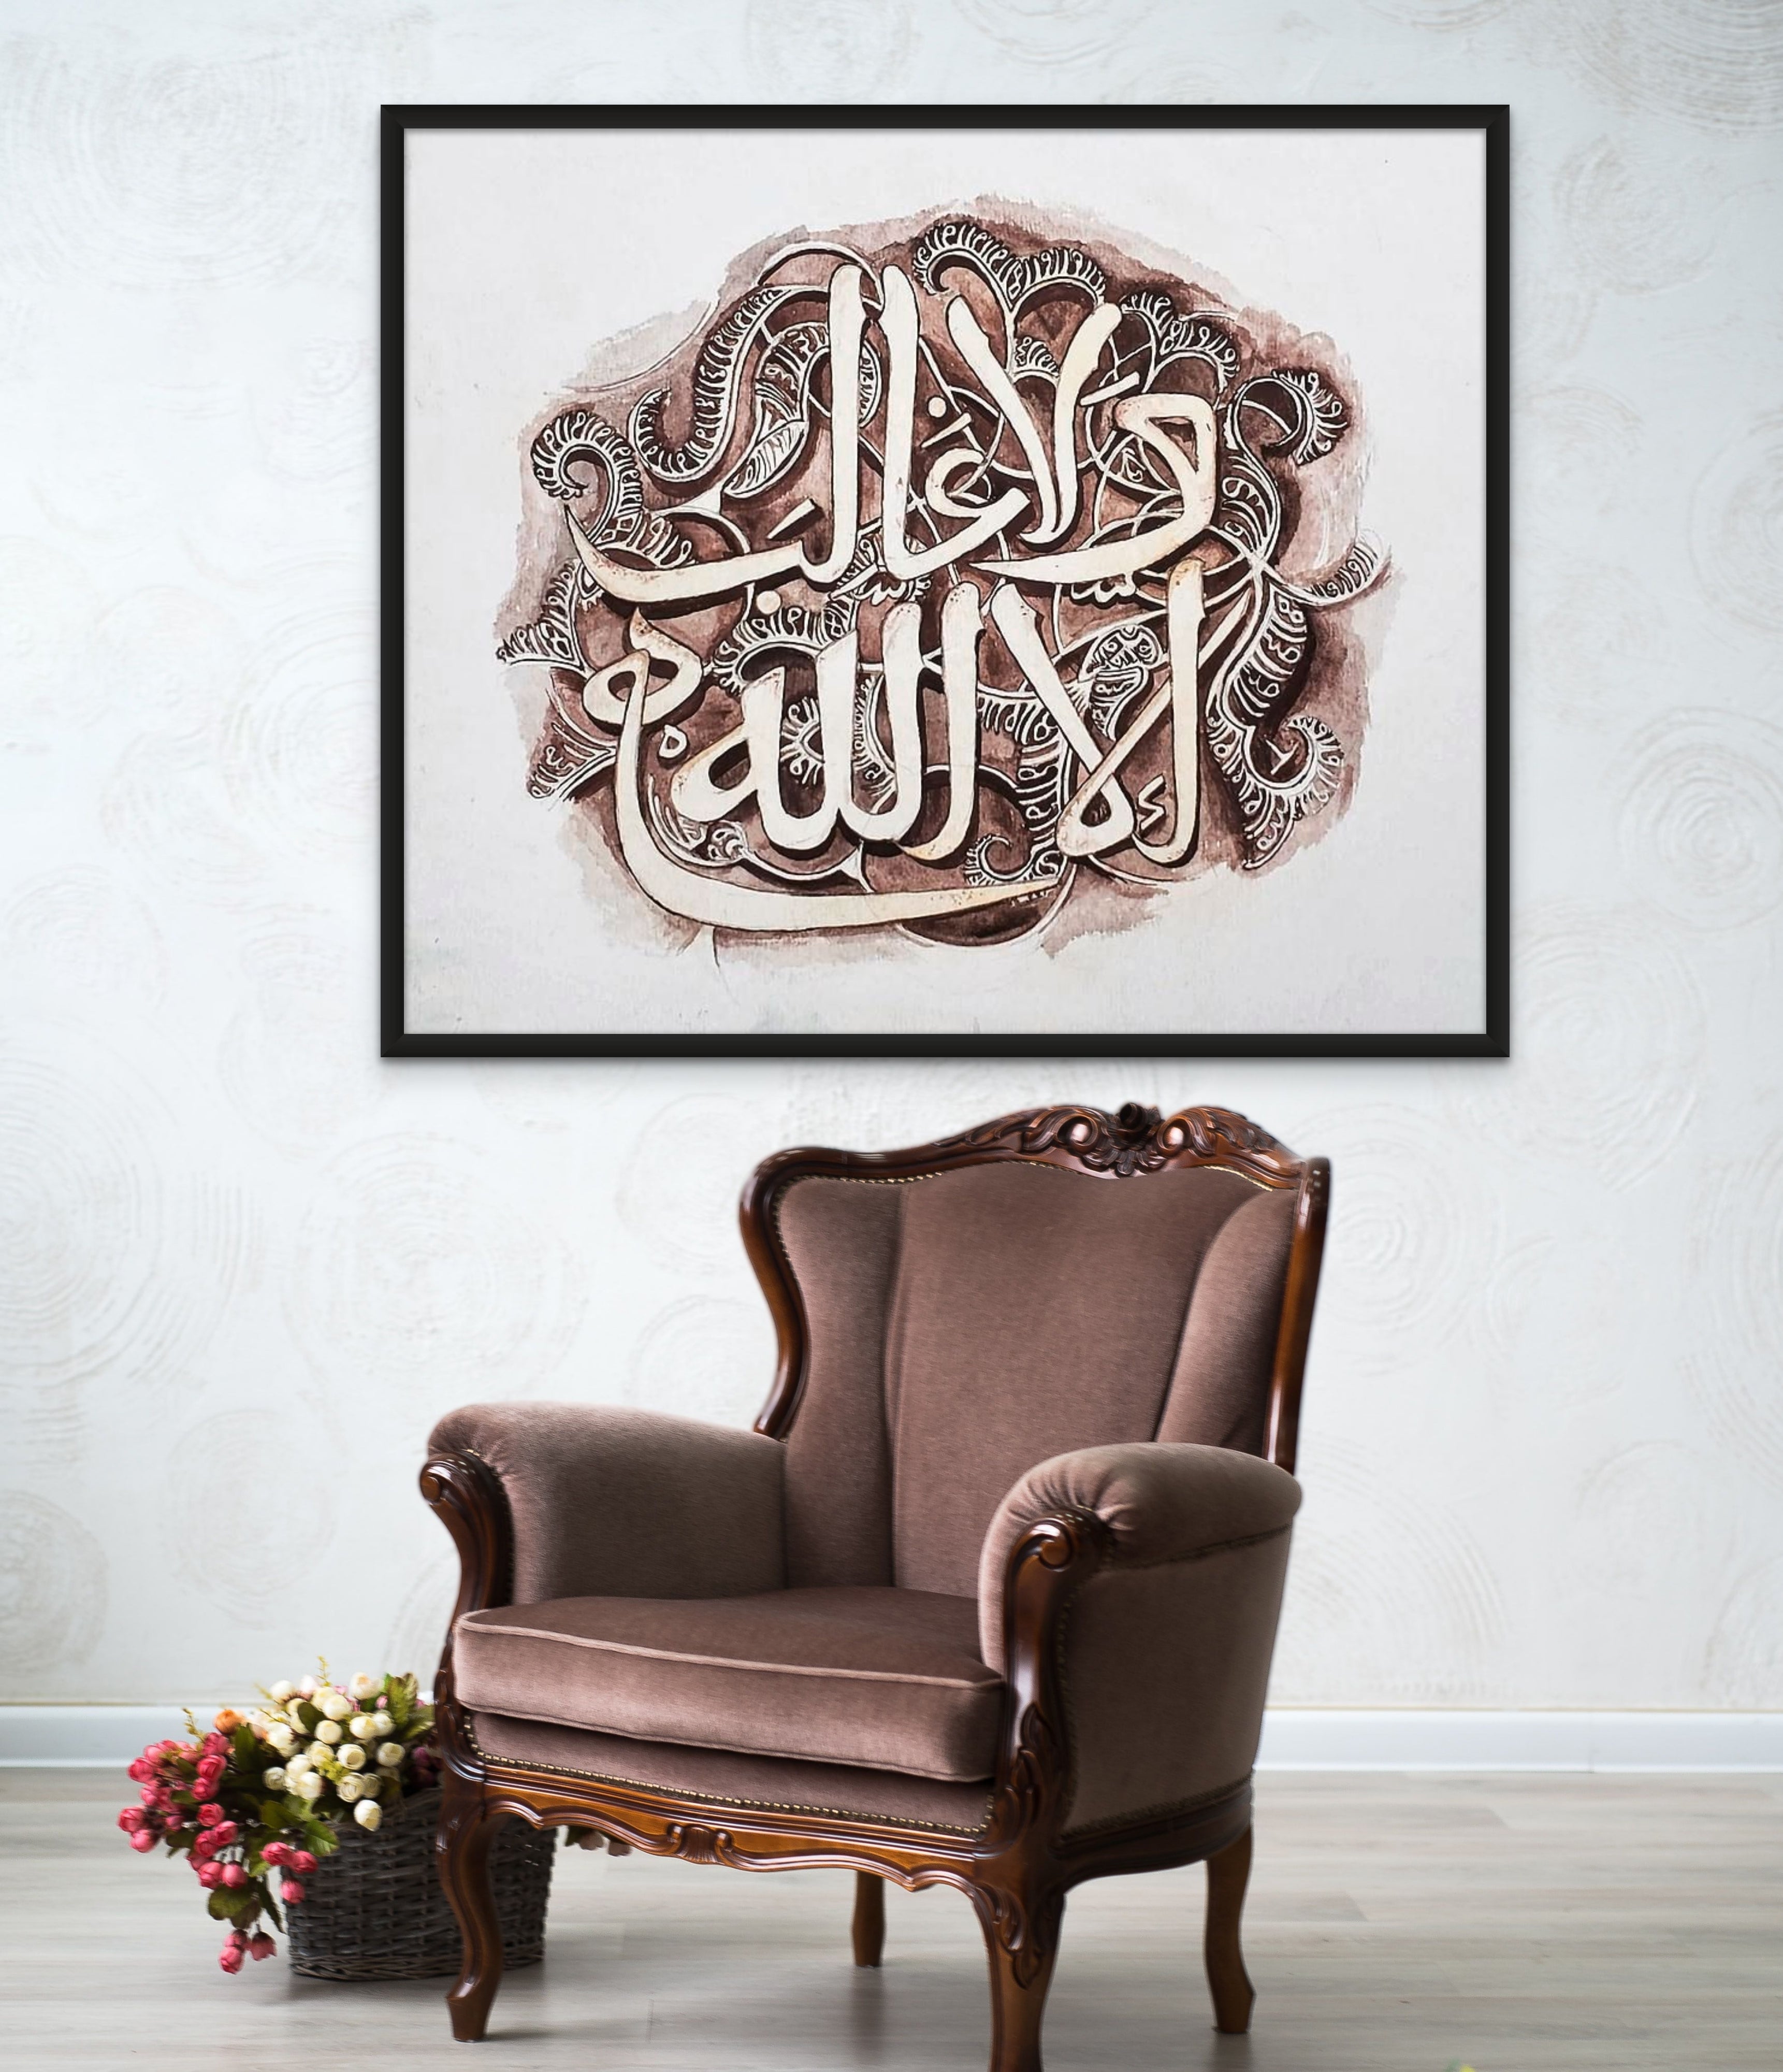 "There Is No Victor But Allah" - Islamic Art Ltd